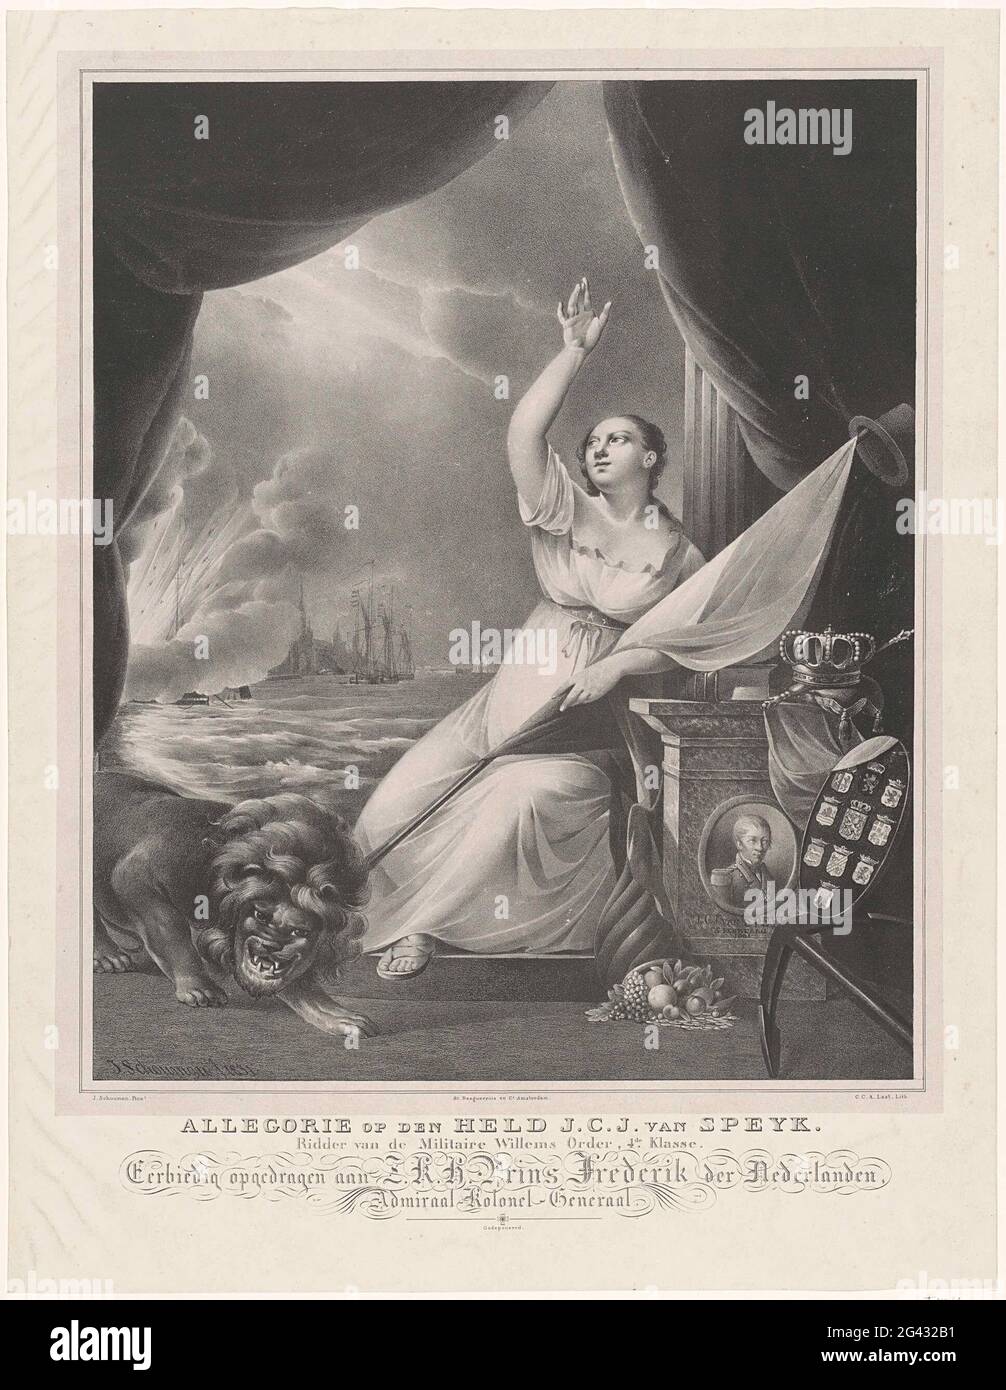 Allegory on the hero's death of Jan van Speijk, 1831; Allegory on the hero J.C.J. from Speyk. Knight of the Military Willems Order, 4th. class. Allegory on the hero's death of Jan van Speijk, 5 February 1831. The Dutch Virgin with Dutch flag and freedom hat leaned on a pedestal with the portrait of Van Speijk. On the left a grim Dutch lion. In the background exploding Jan van Speijk's gunboat on the Scheldt for Antwerp. Stock Photo